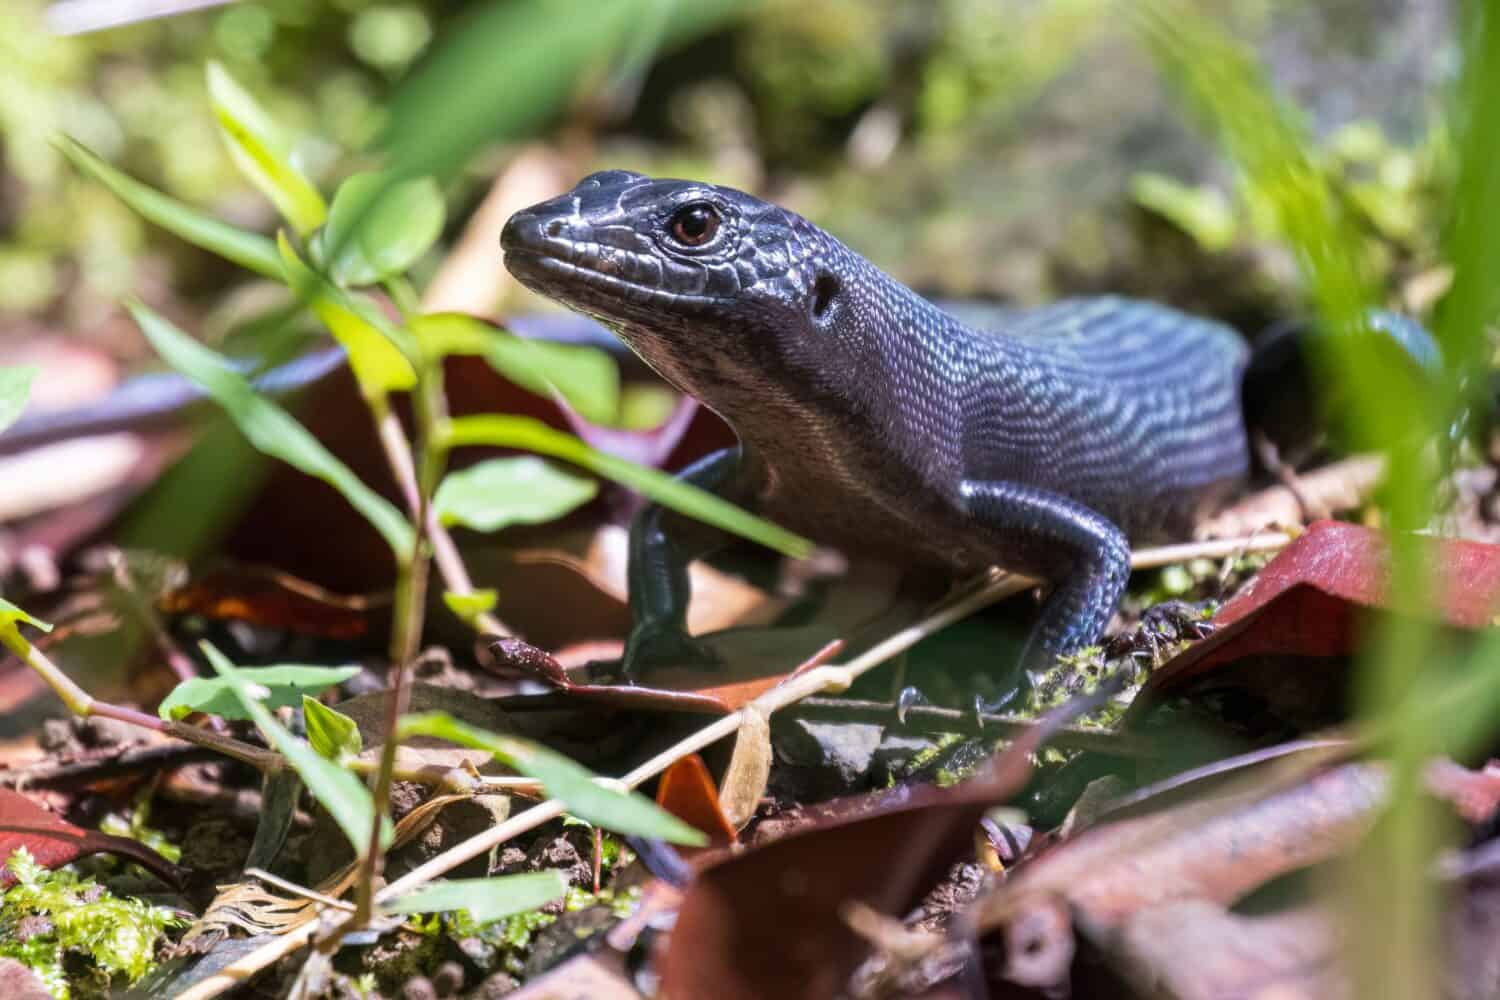 A wild black emo skink on the island of Tutuila in the National Park of American Samoa.